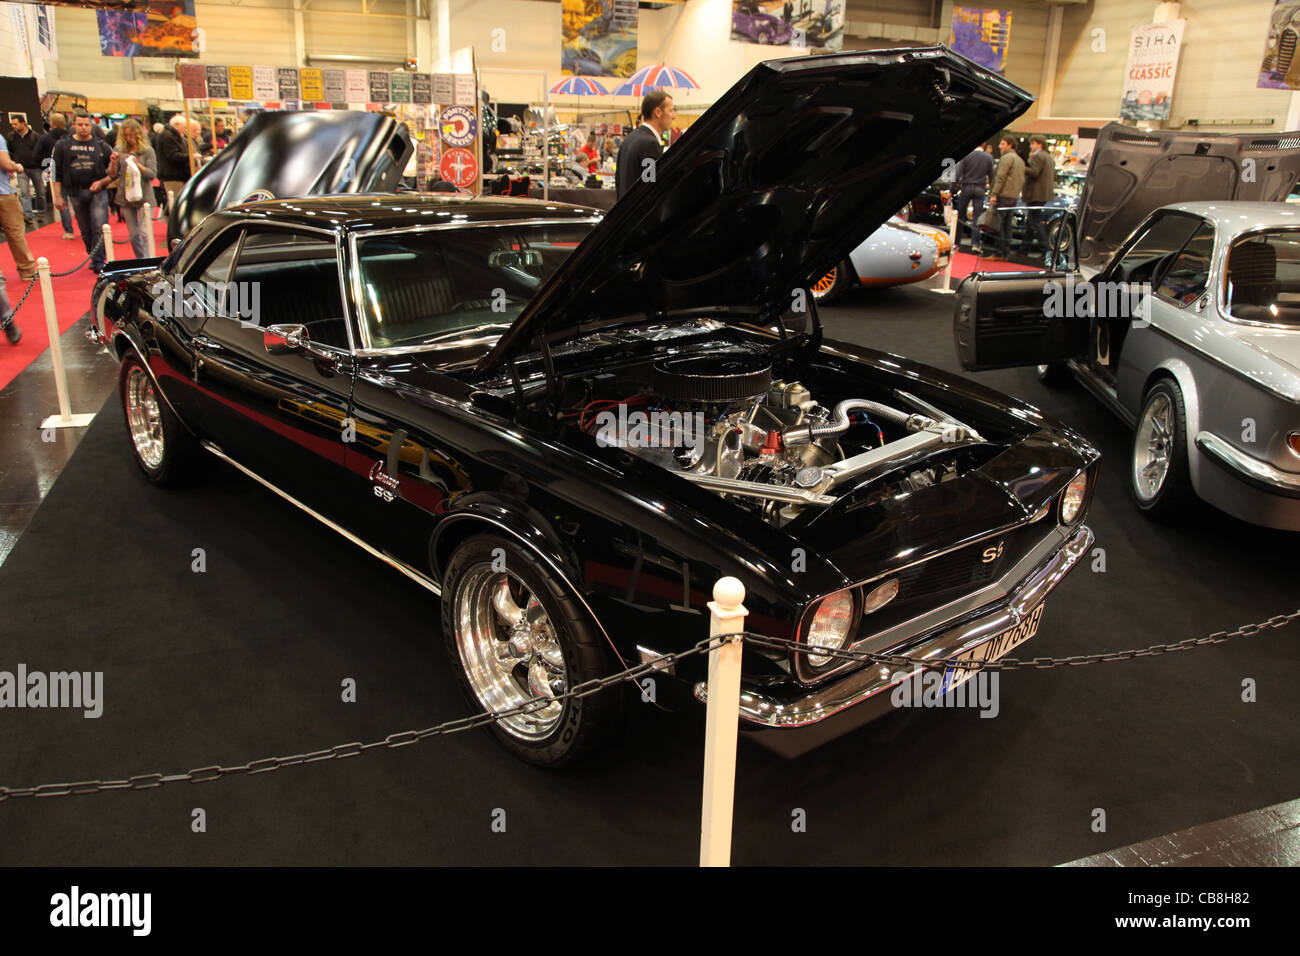 Chevrolet Camaro SS from 1967 shown at the Essen Motor Show in Essen, Germany, on November 29, 2011 Stock Photo